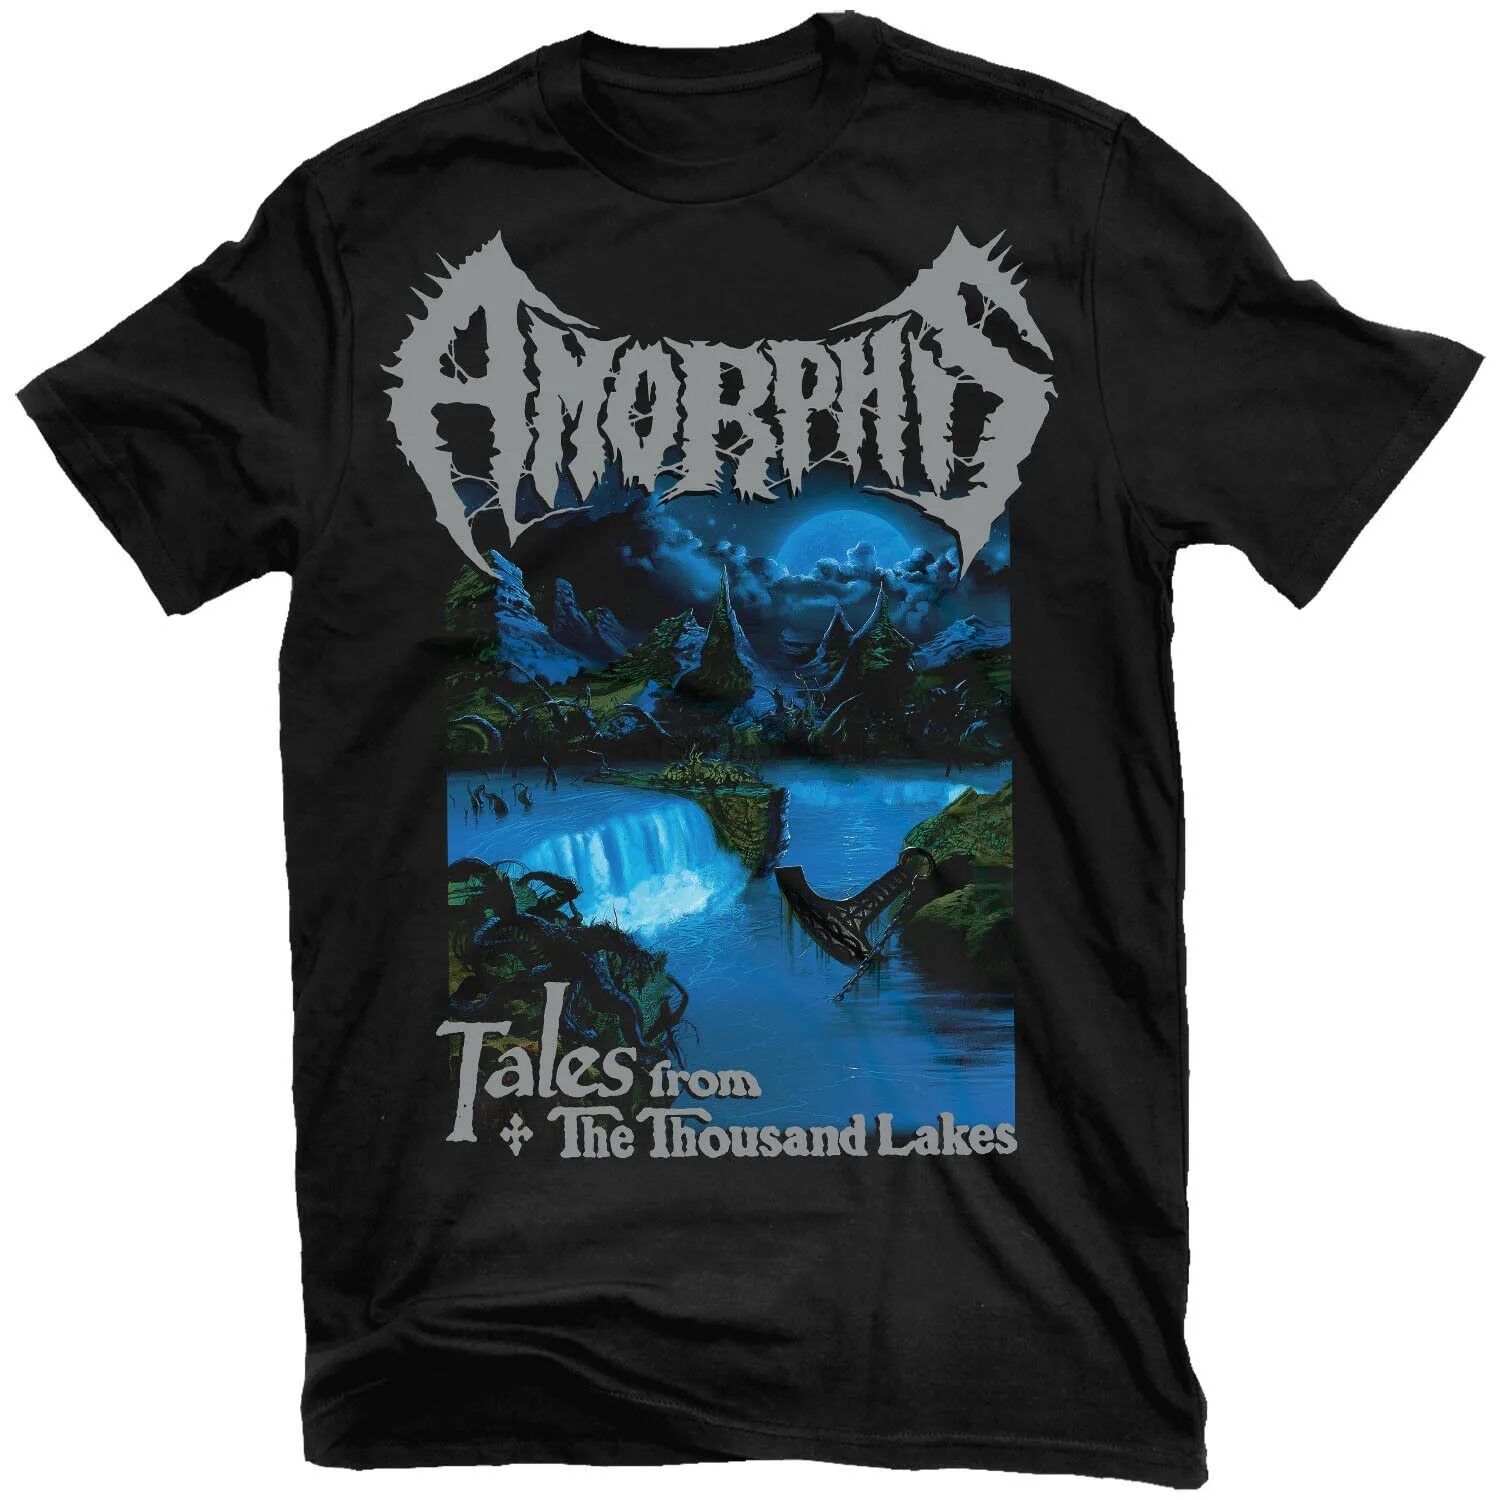 Футболка Amorphis Black Winter Day. Amorphis Tales from the Thousand Lakes 1994. Amorphis Tales. Amorphis Tales from the.